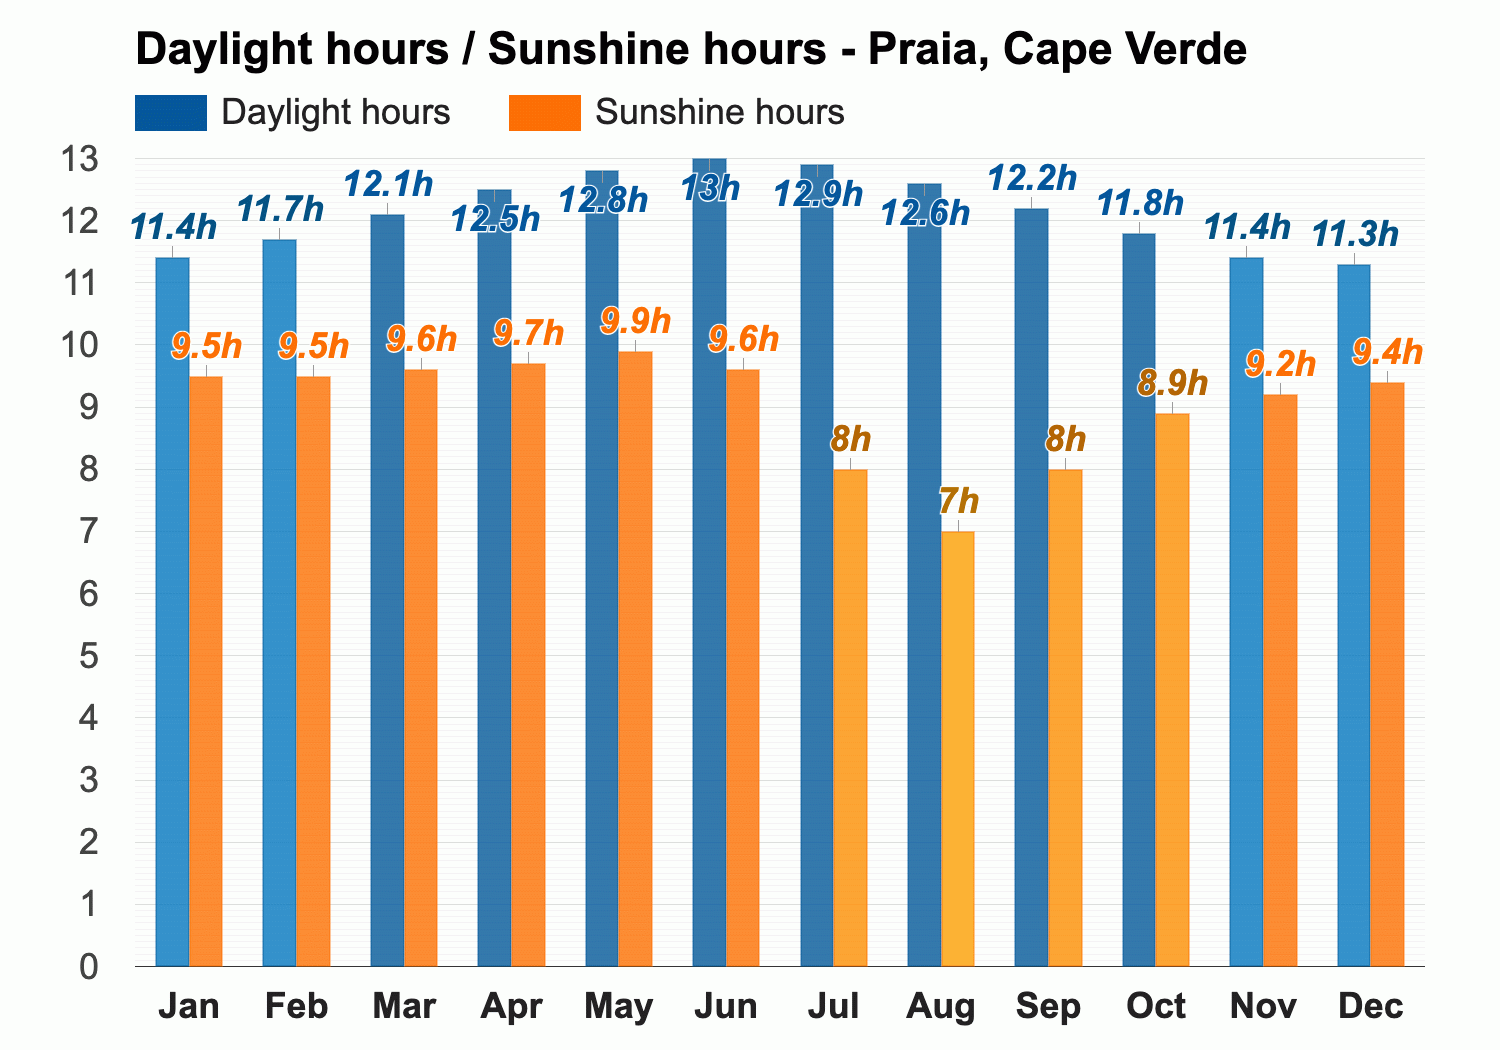 Praia, Cape Verde - June weather forecast and climate information | Weather  Atlas